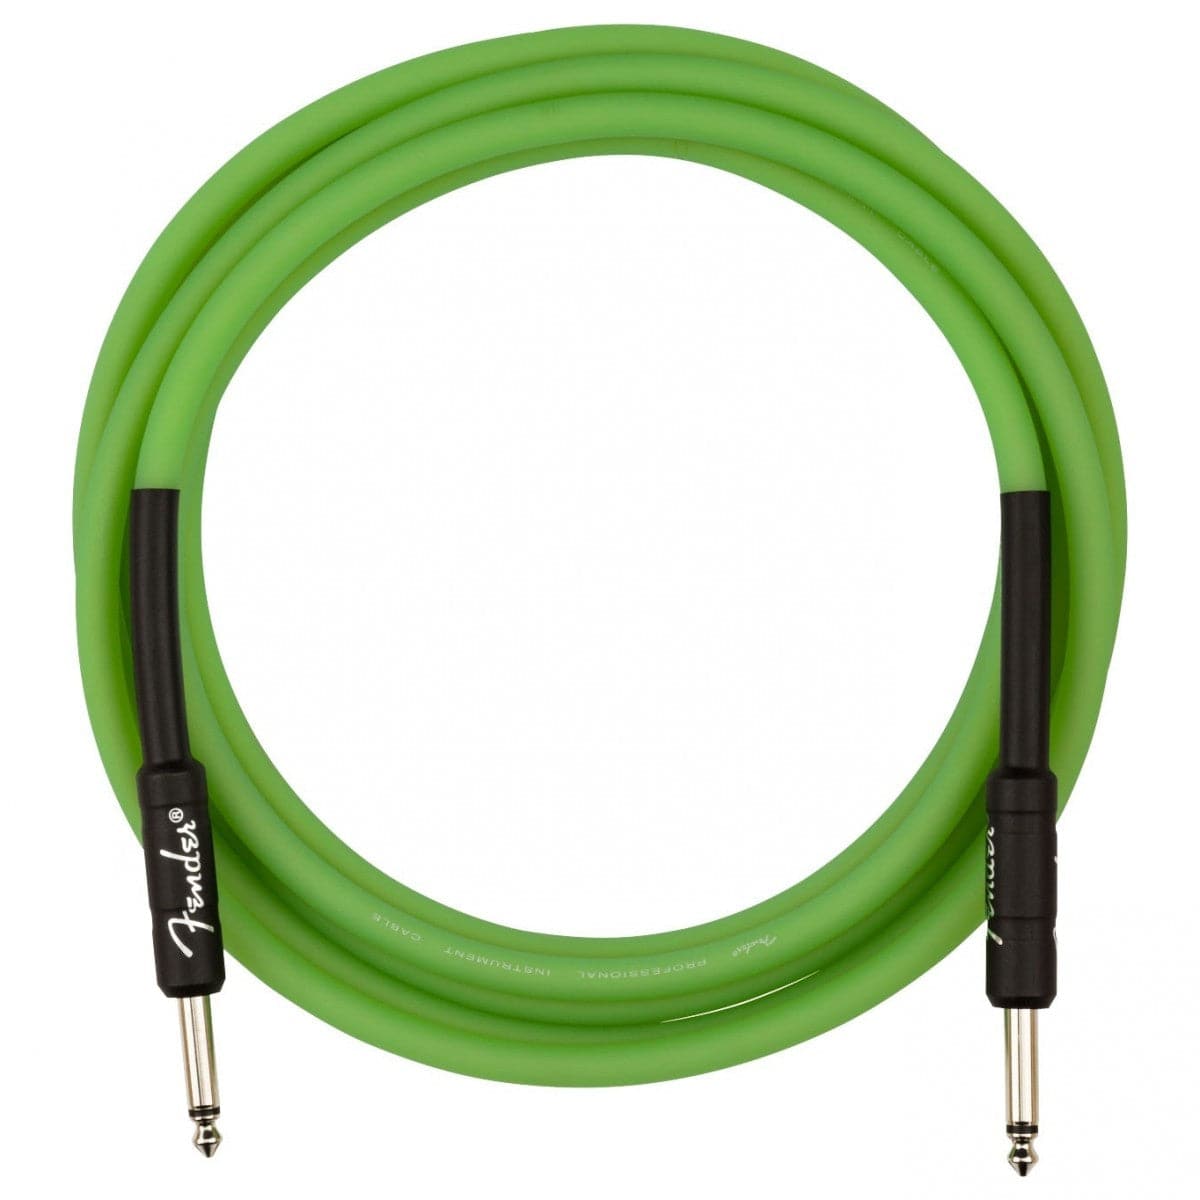 Fender Glow In The Dark Cable -10ft 3m - Green